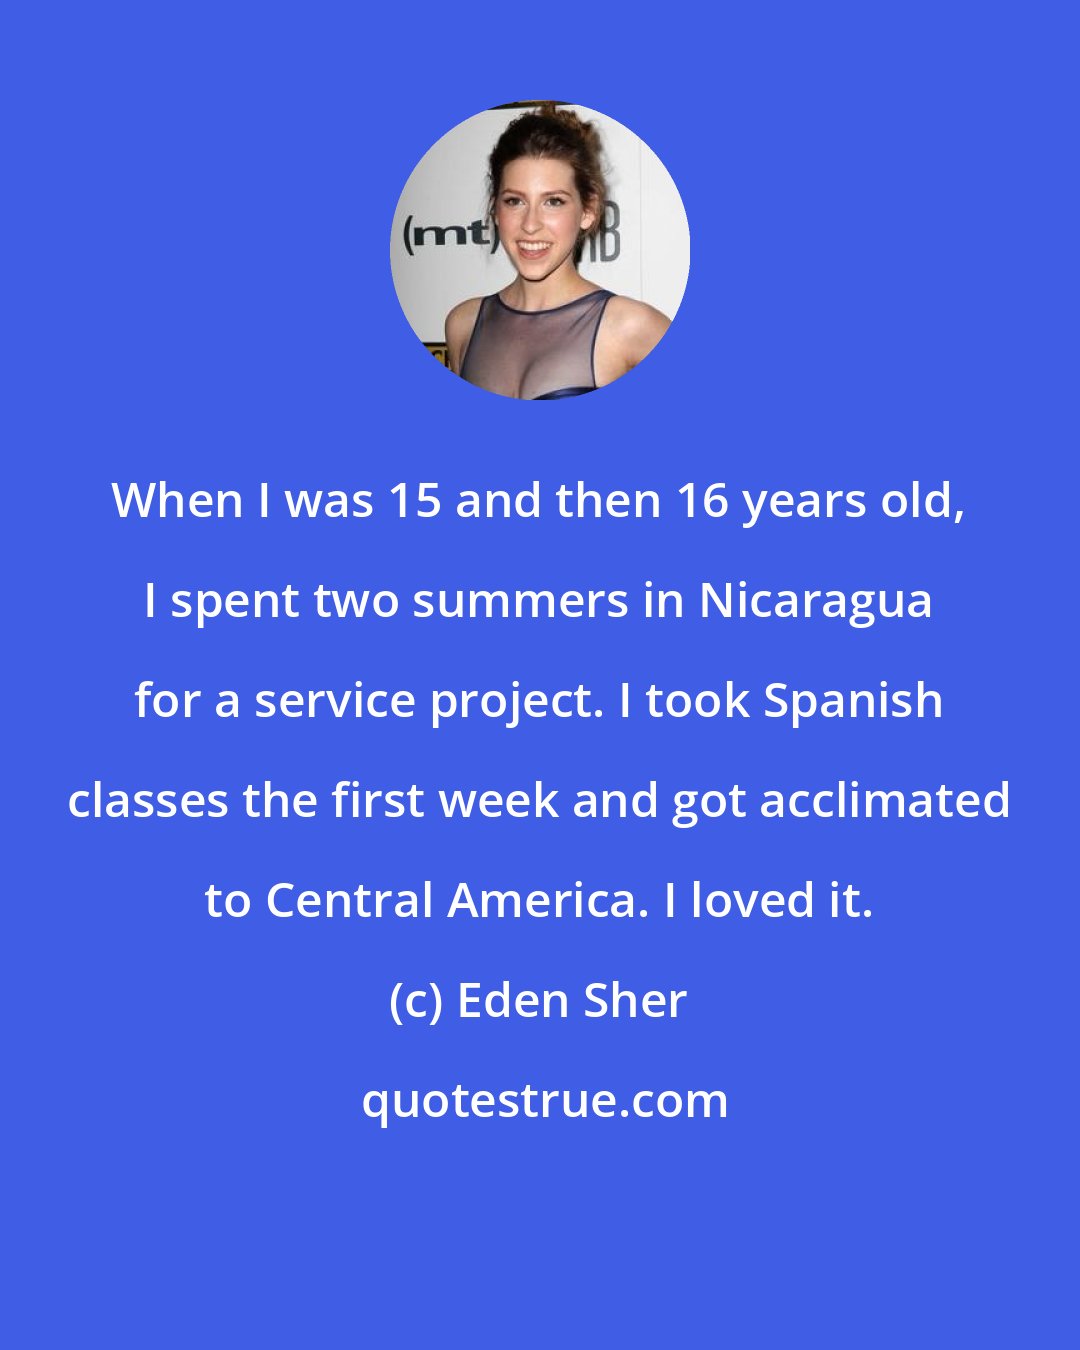 Eden Sher: When I was 15 and then 16 years old, I spent two summers in Nicaragua for a service project. I took Spanish classes the first week and got acclimated to Central America. I loved it.